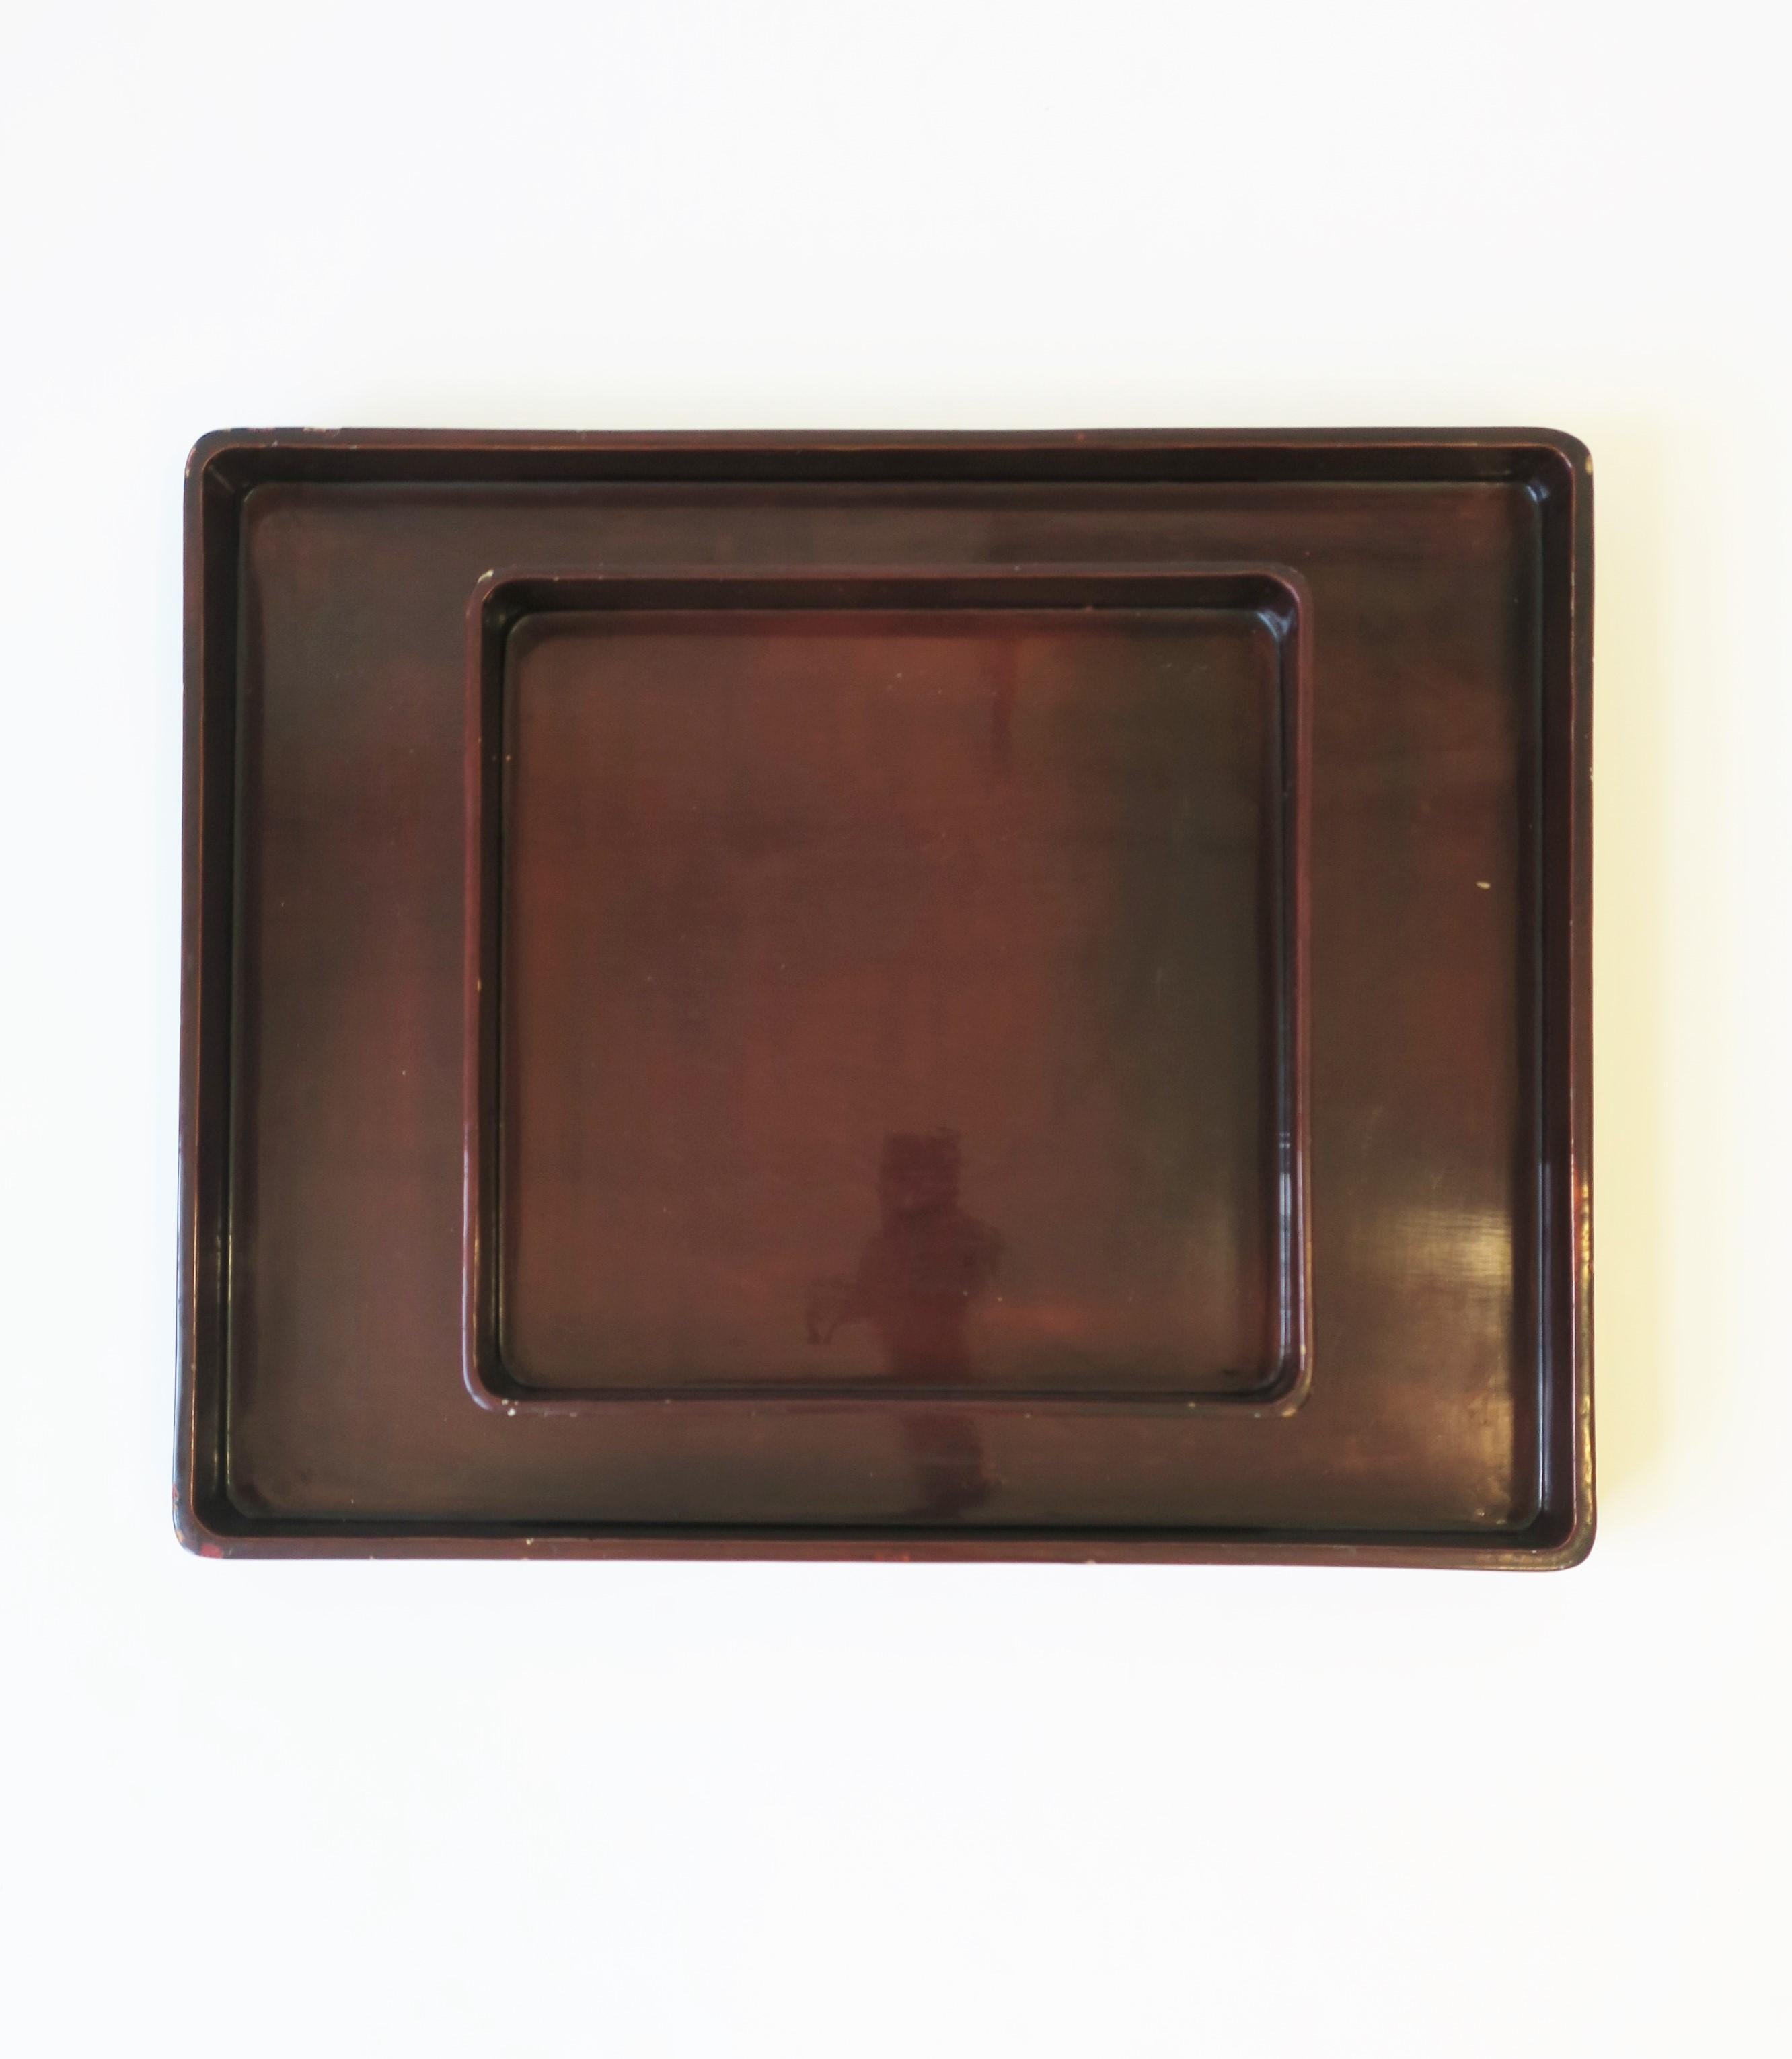 Red Burgundy Lacquer Serving Tray by Designer Rae Kasian, Square 5